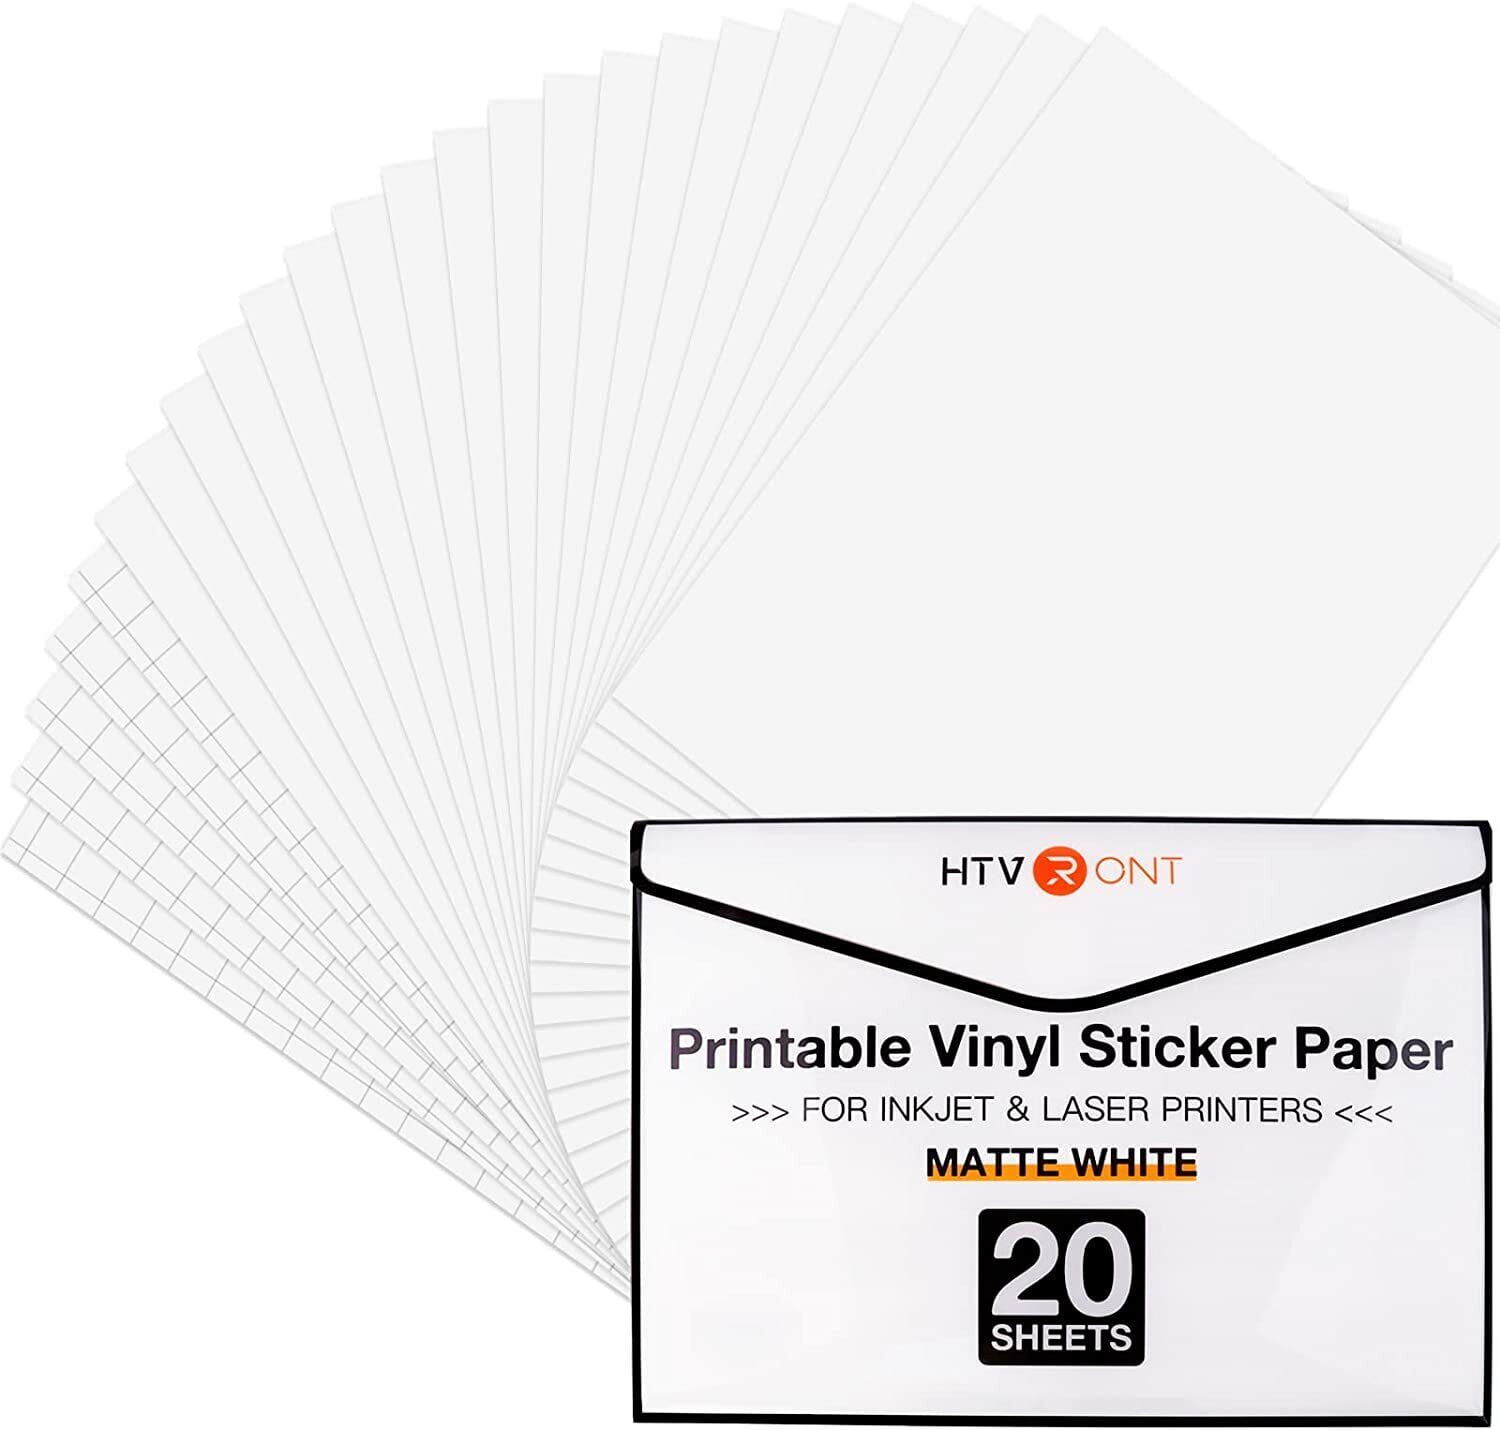  Premium Printable Vinyl Sticker Paper for Your Inkjet and Laser  Printer – 25 Matte White Waterproof Decal Paper Sheets - Dries Quickly and  Holds Ink Beautifully - Accessories Set for Cricut : Office Products